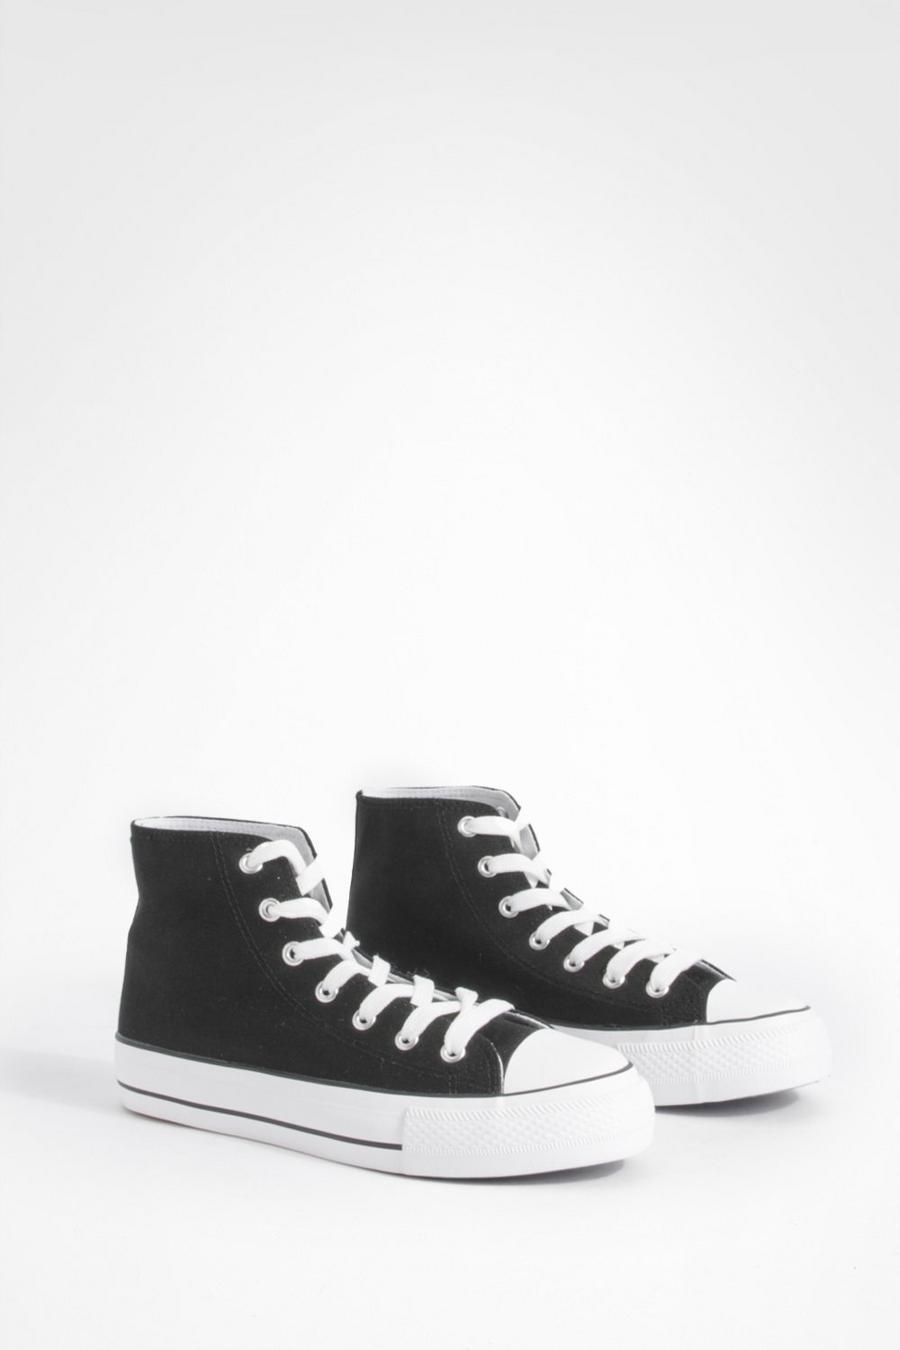 Black Platform High Top Lace Up Sneakers